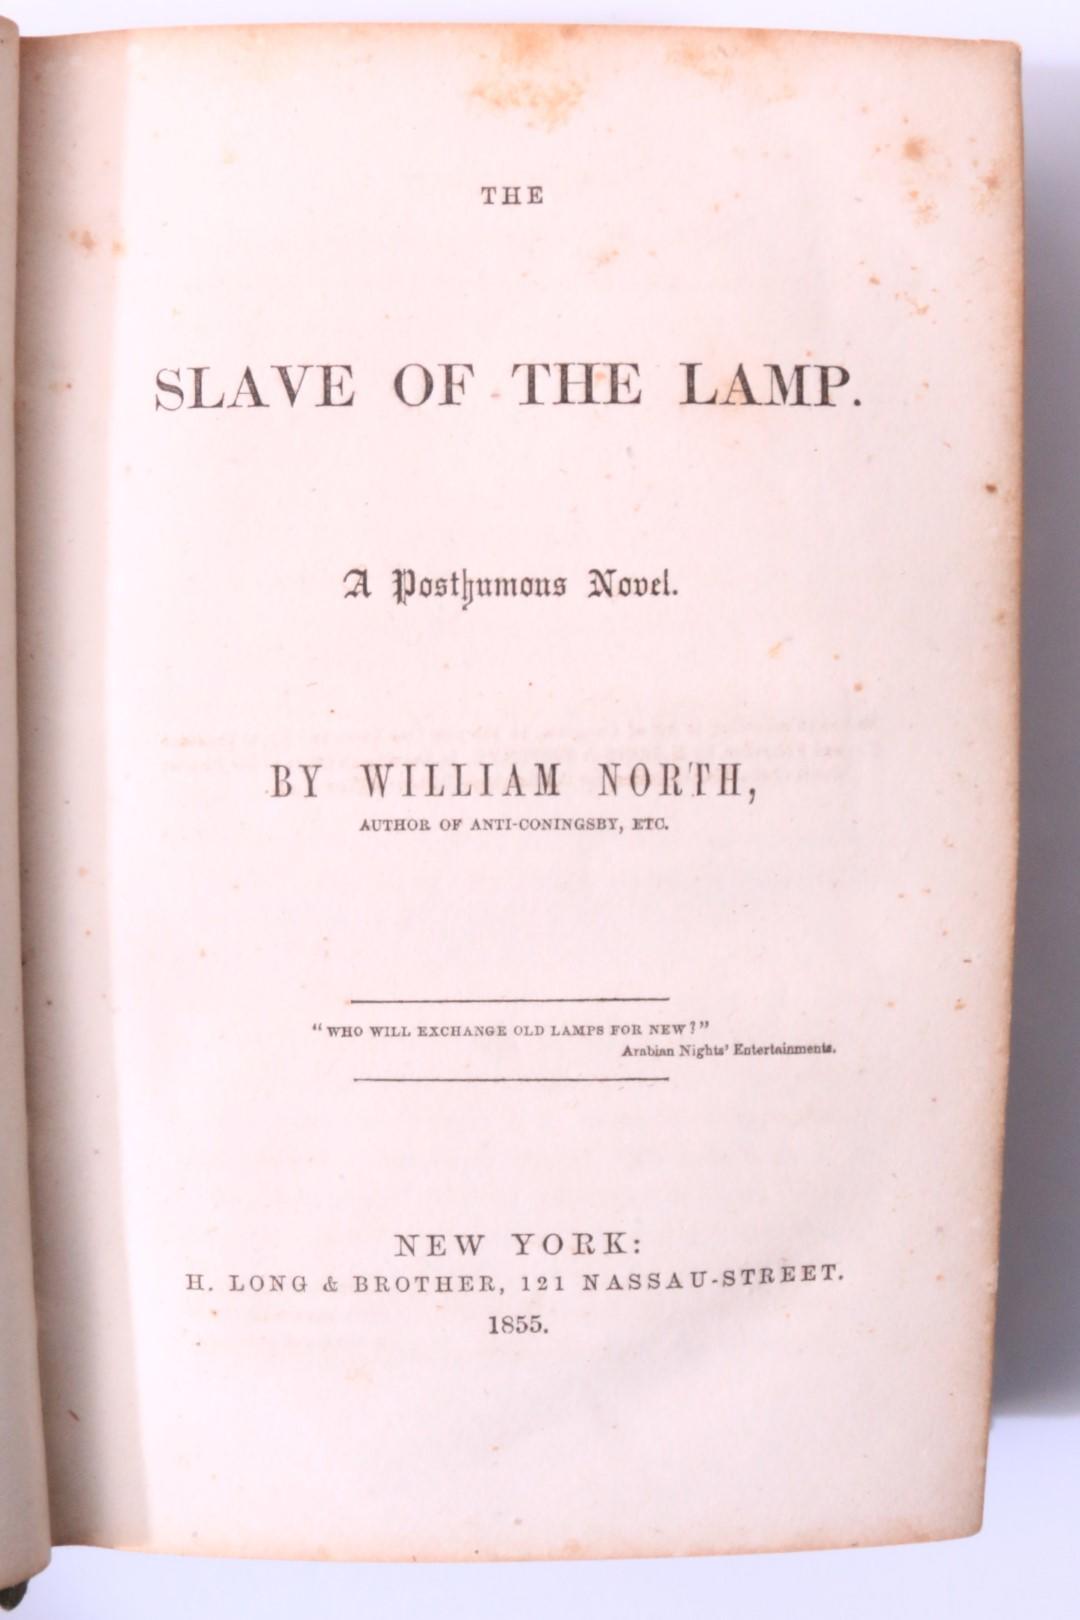 William North - The Slave of the Lamp. A Posthumous Novel - H. Long and Brother, 1855, First Edition.